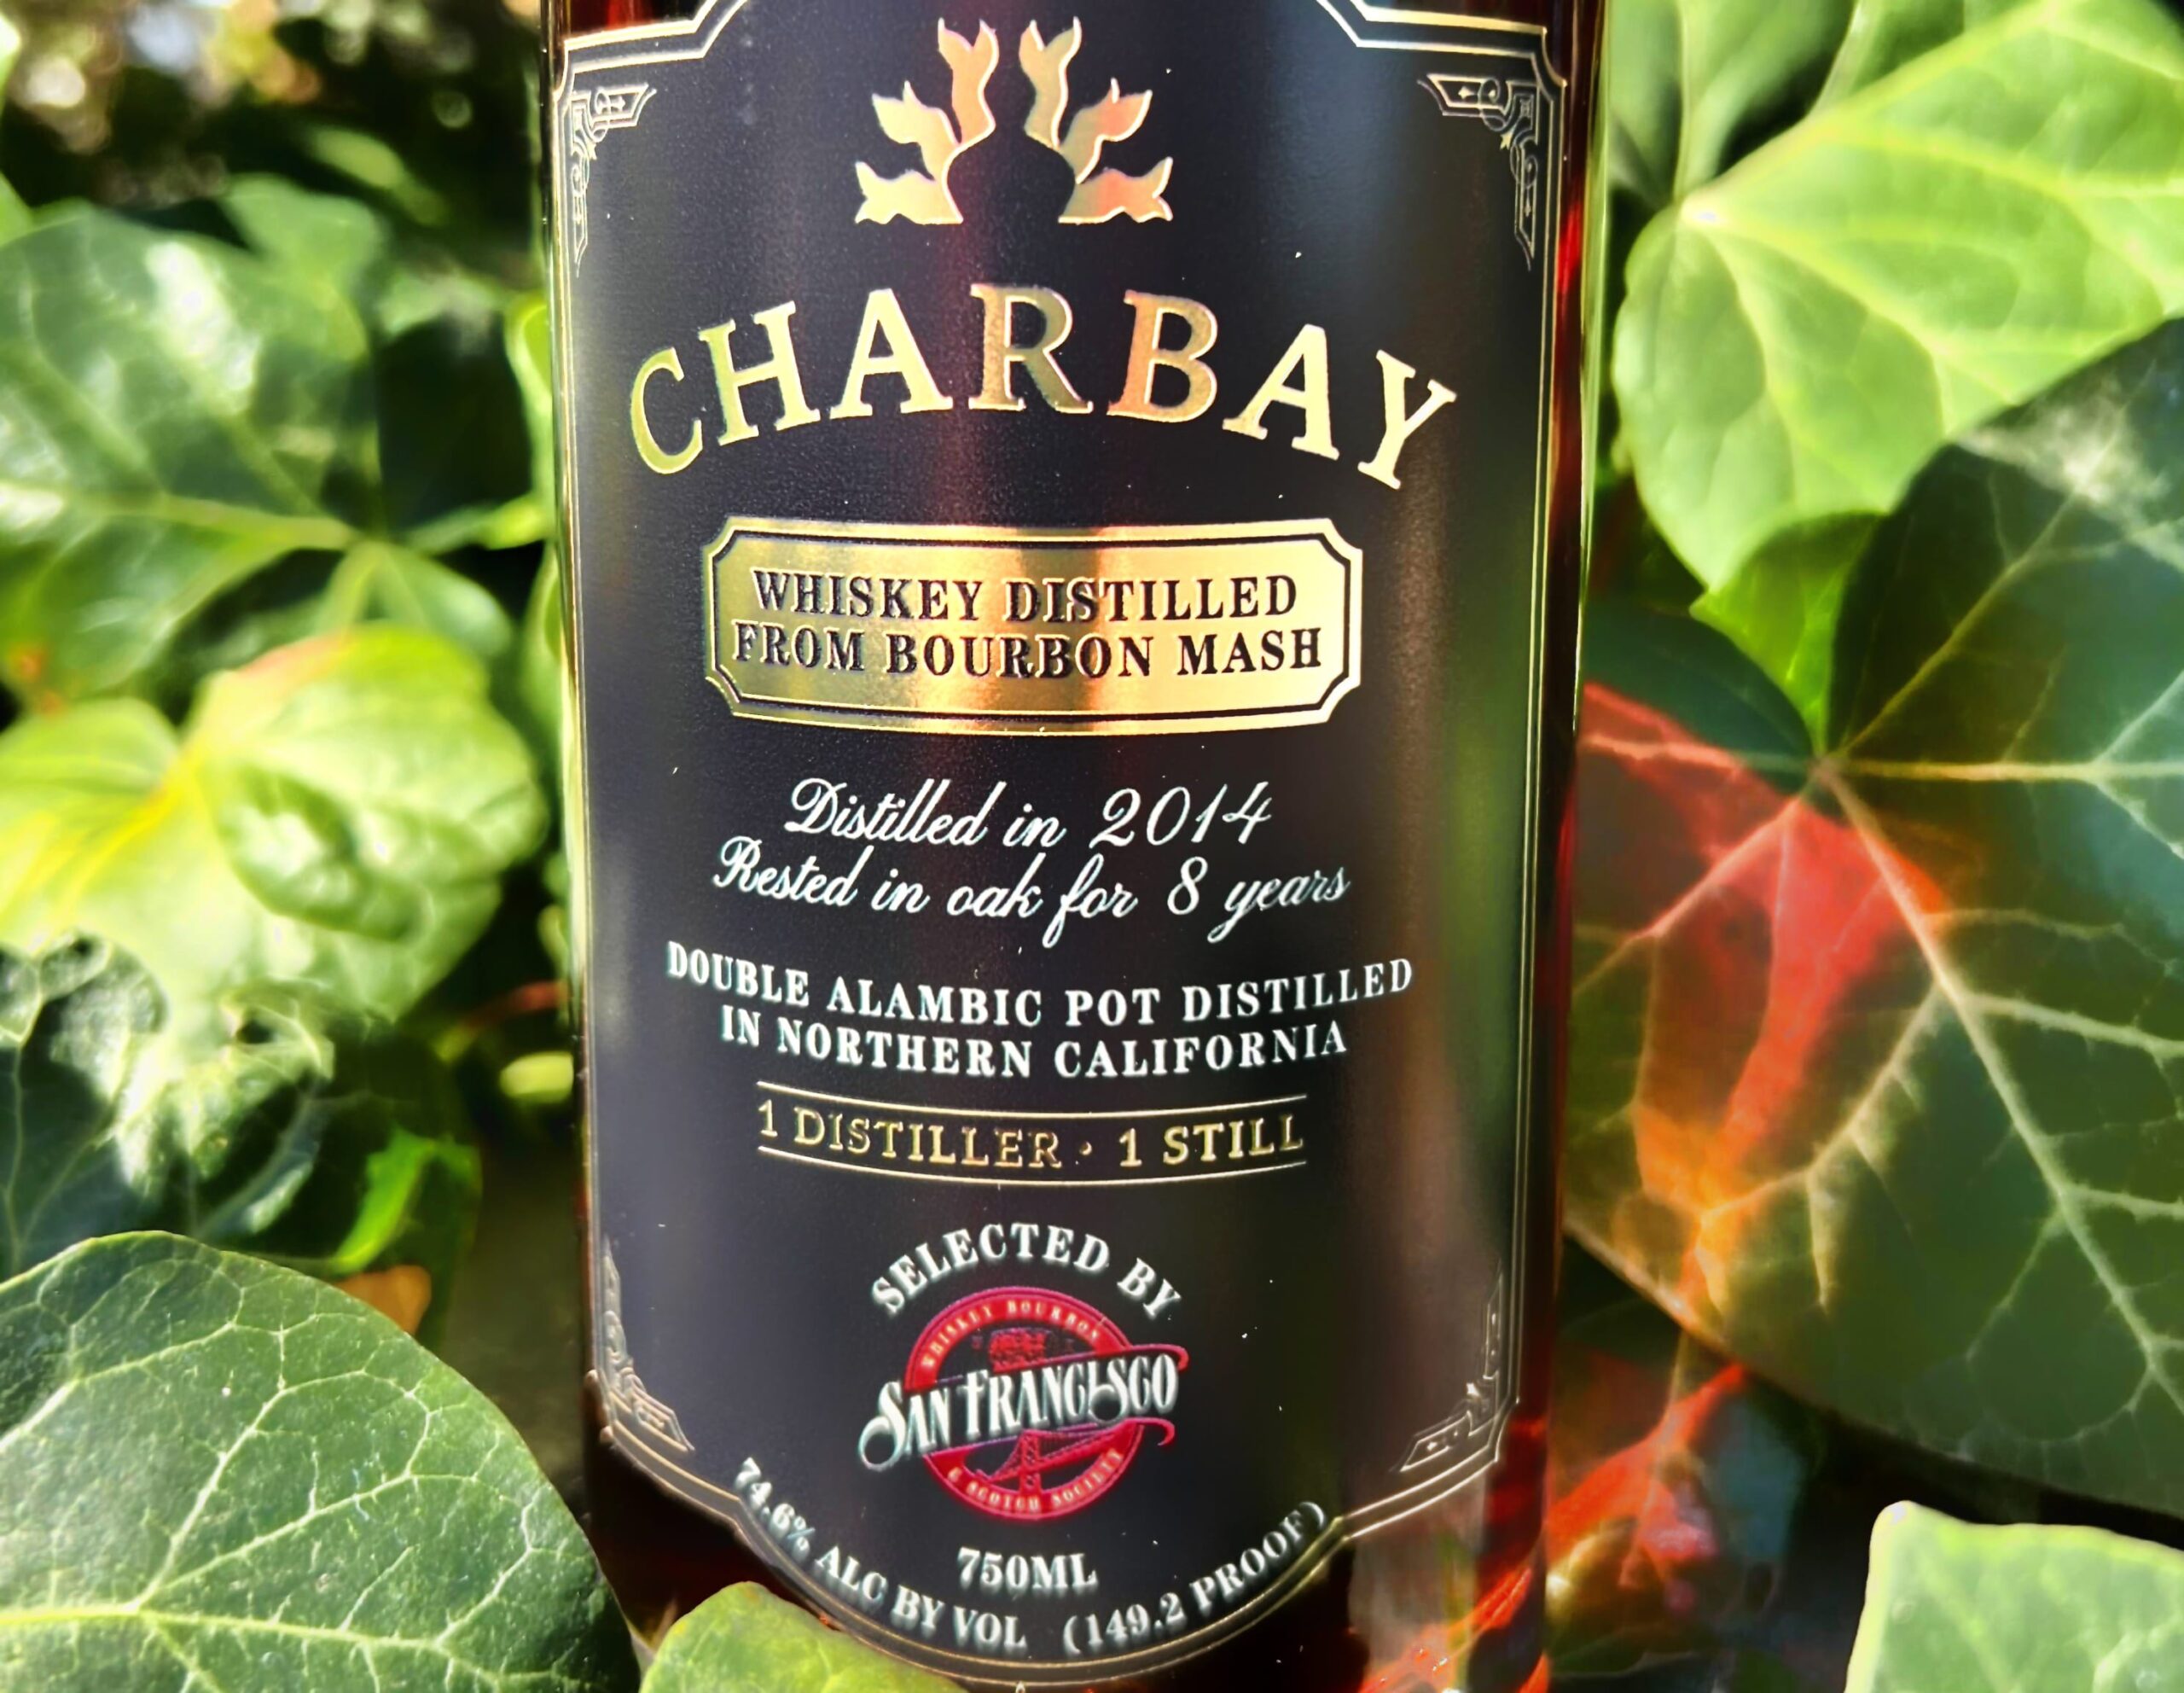 Charbay Whiskey Distilled From Bourbon Mash Review